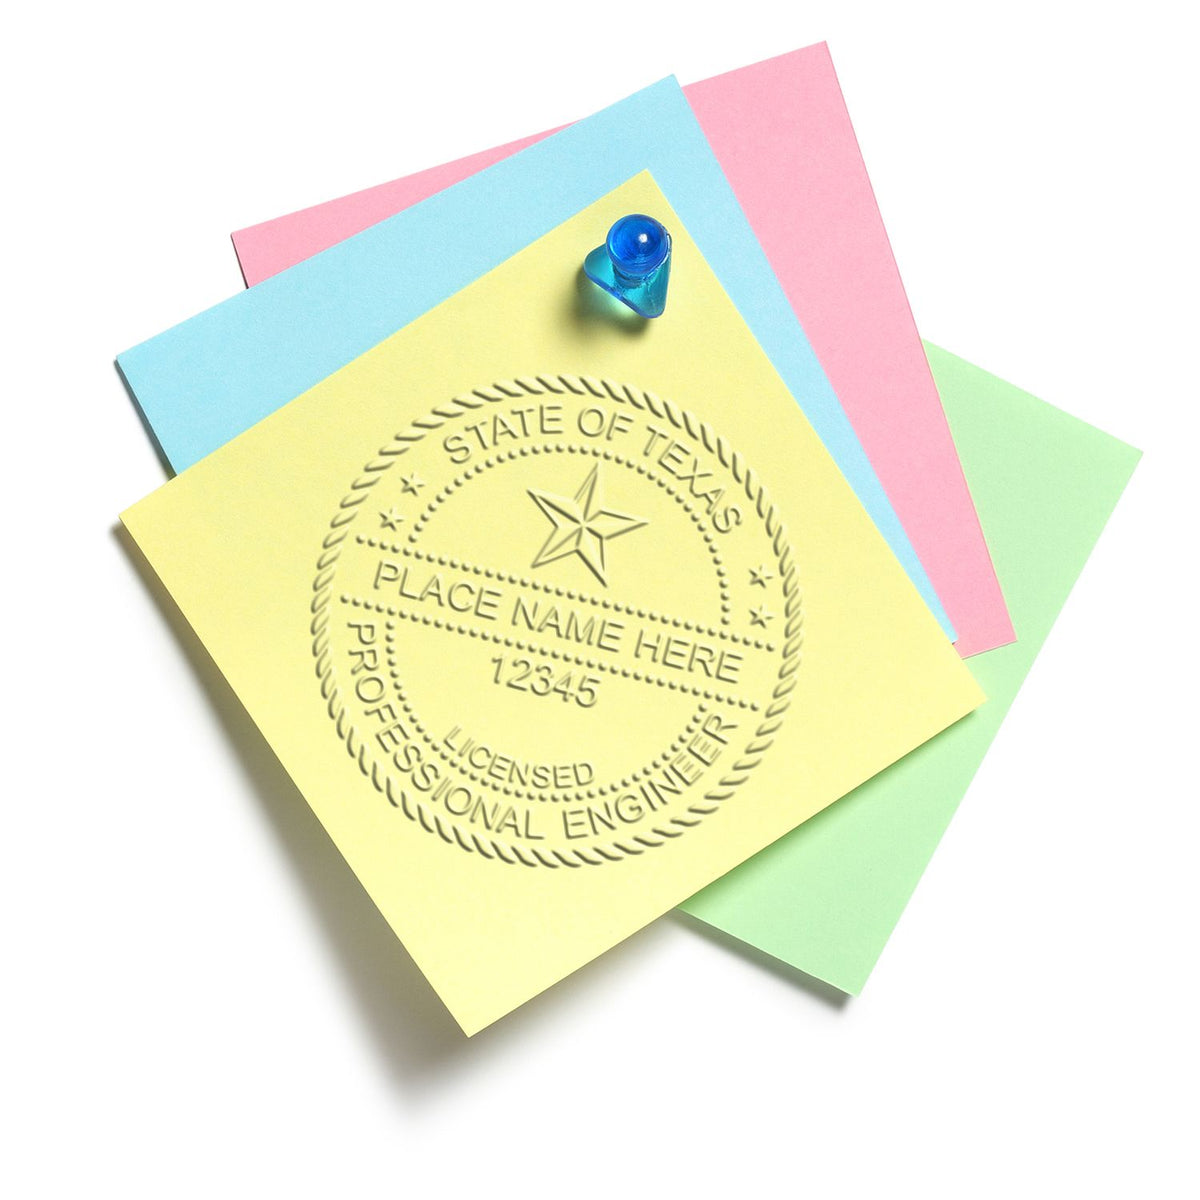 An in use photo of the Gift Texas Engineer Seal showing a sample imprint on a cardstock